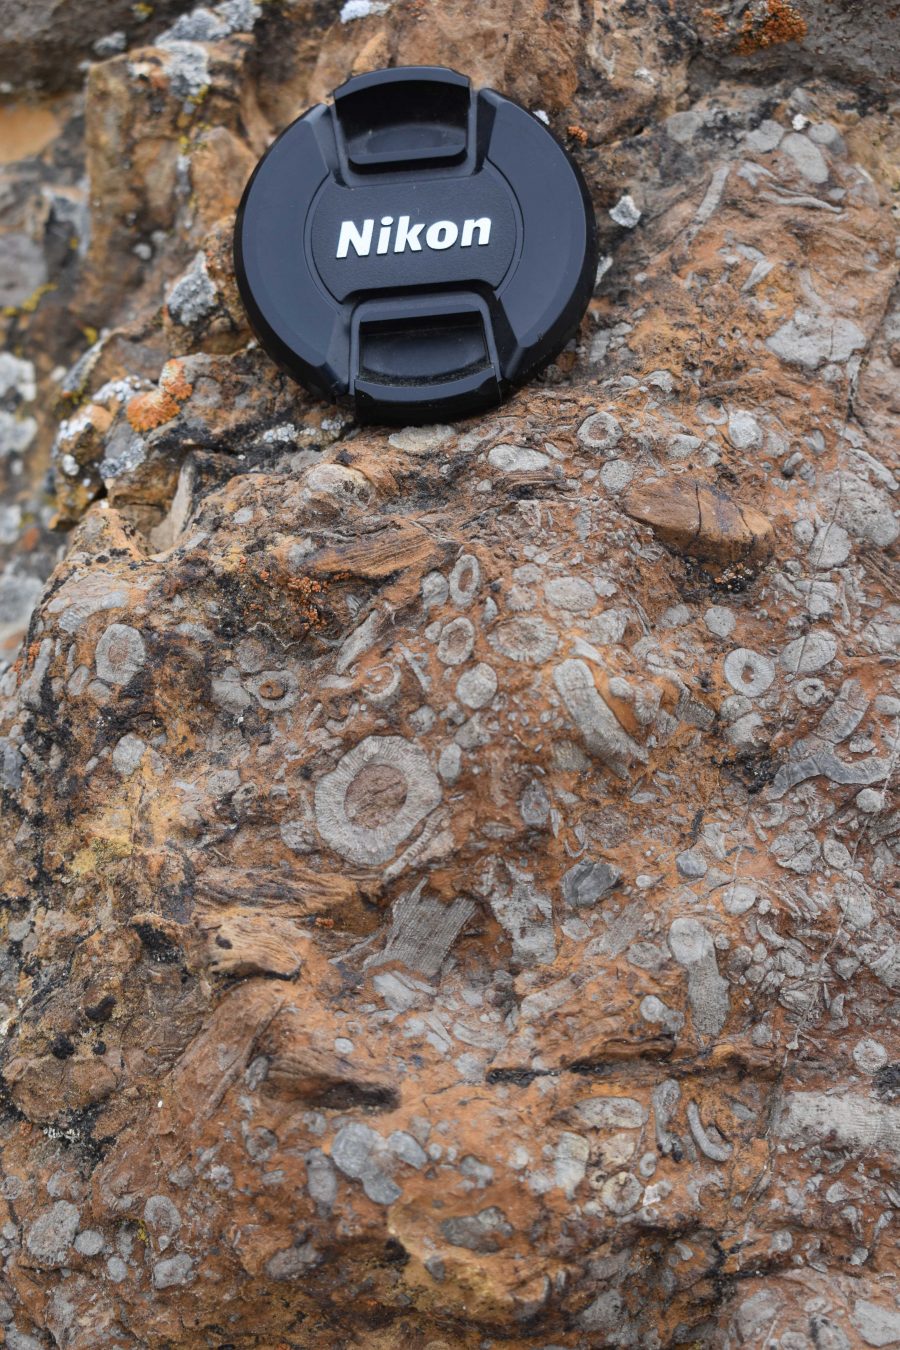 A nikon lens cap sitting on a red rock filled with circular archaeocyanth fossils.